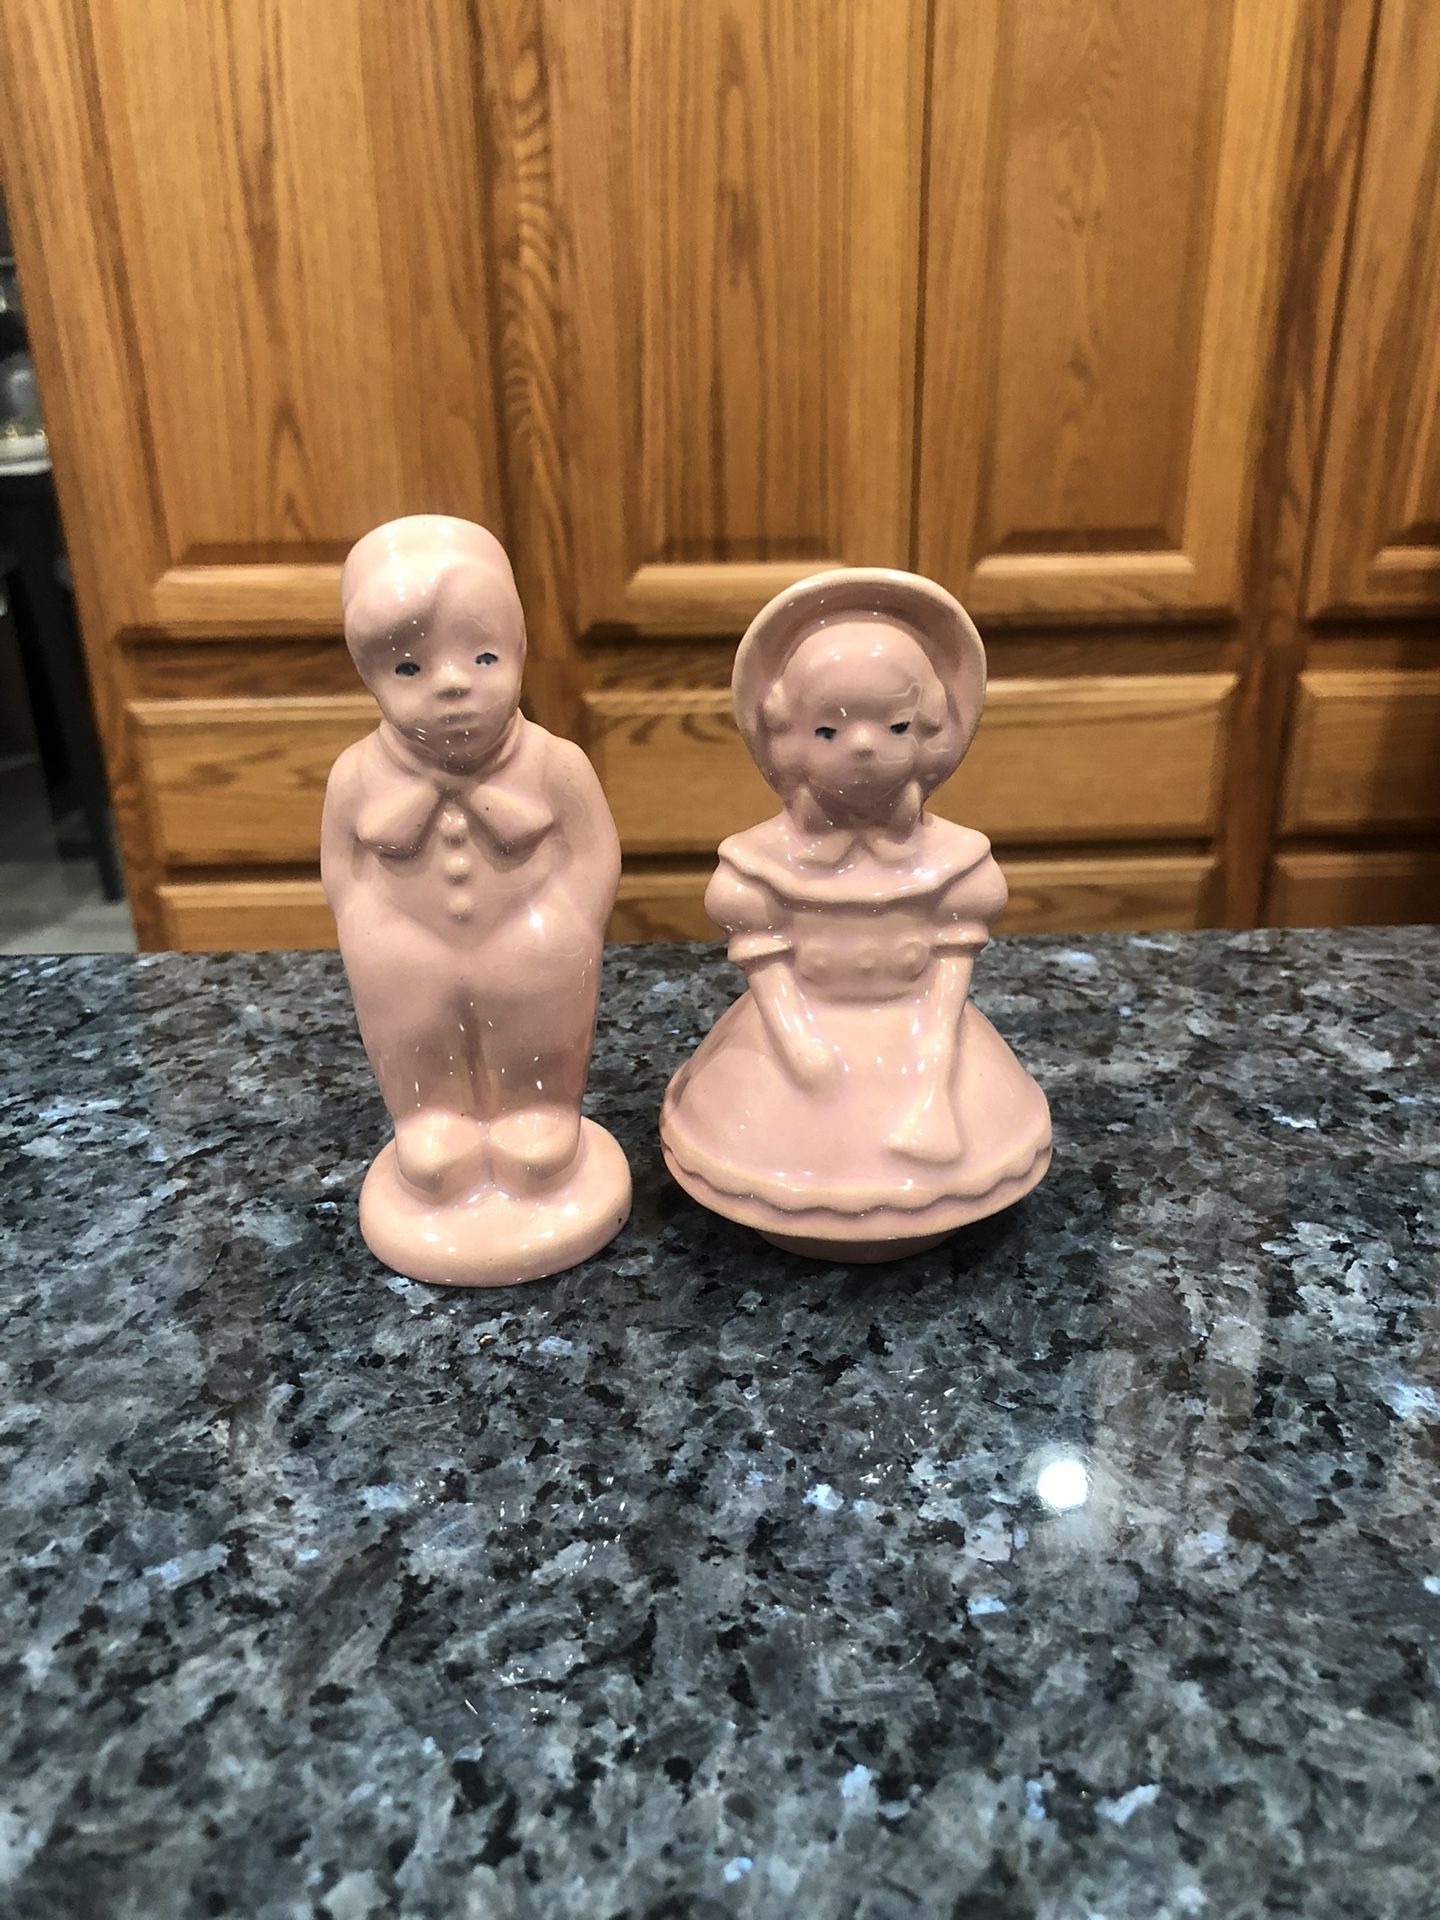 Vintage Boy And Girl Pair Of Salt And Pepper Shakers.  Size 4 1/4 Inches Tall.  Preowned 